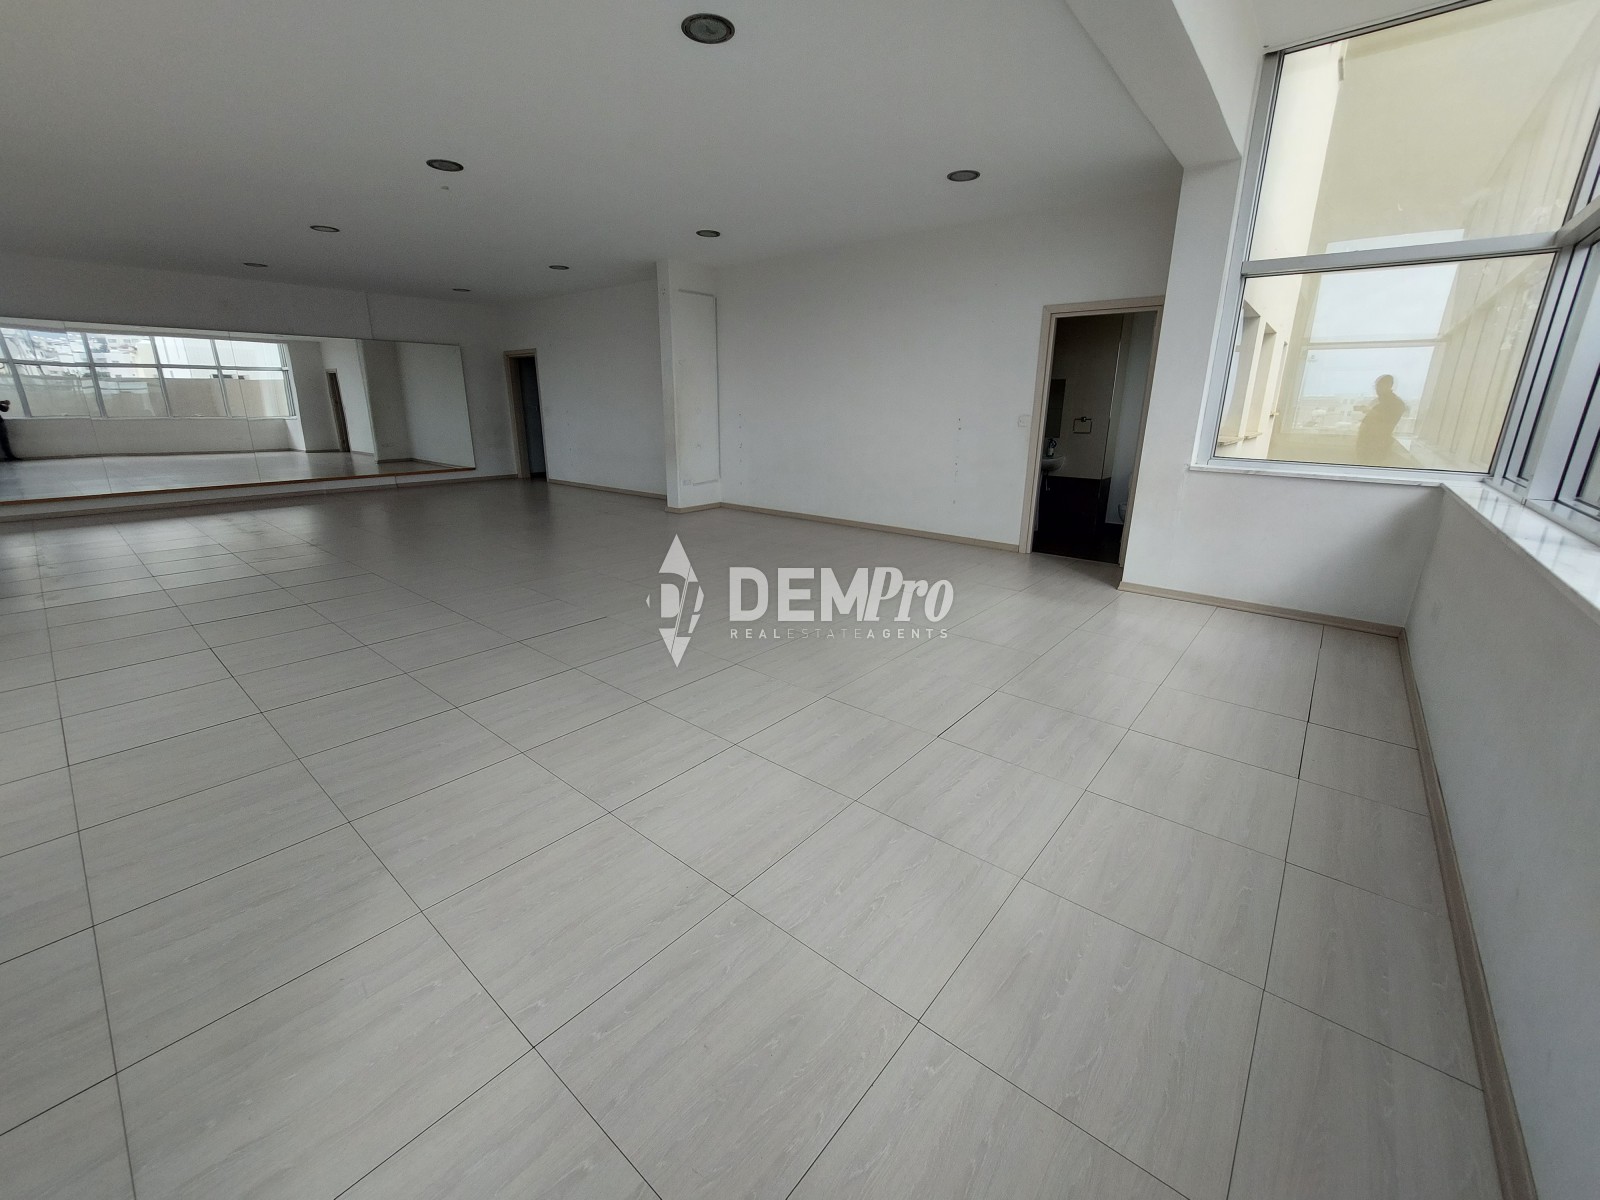 160m² Office for Rent in Paphos – City Center